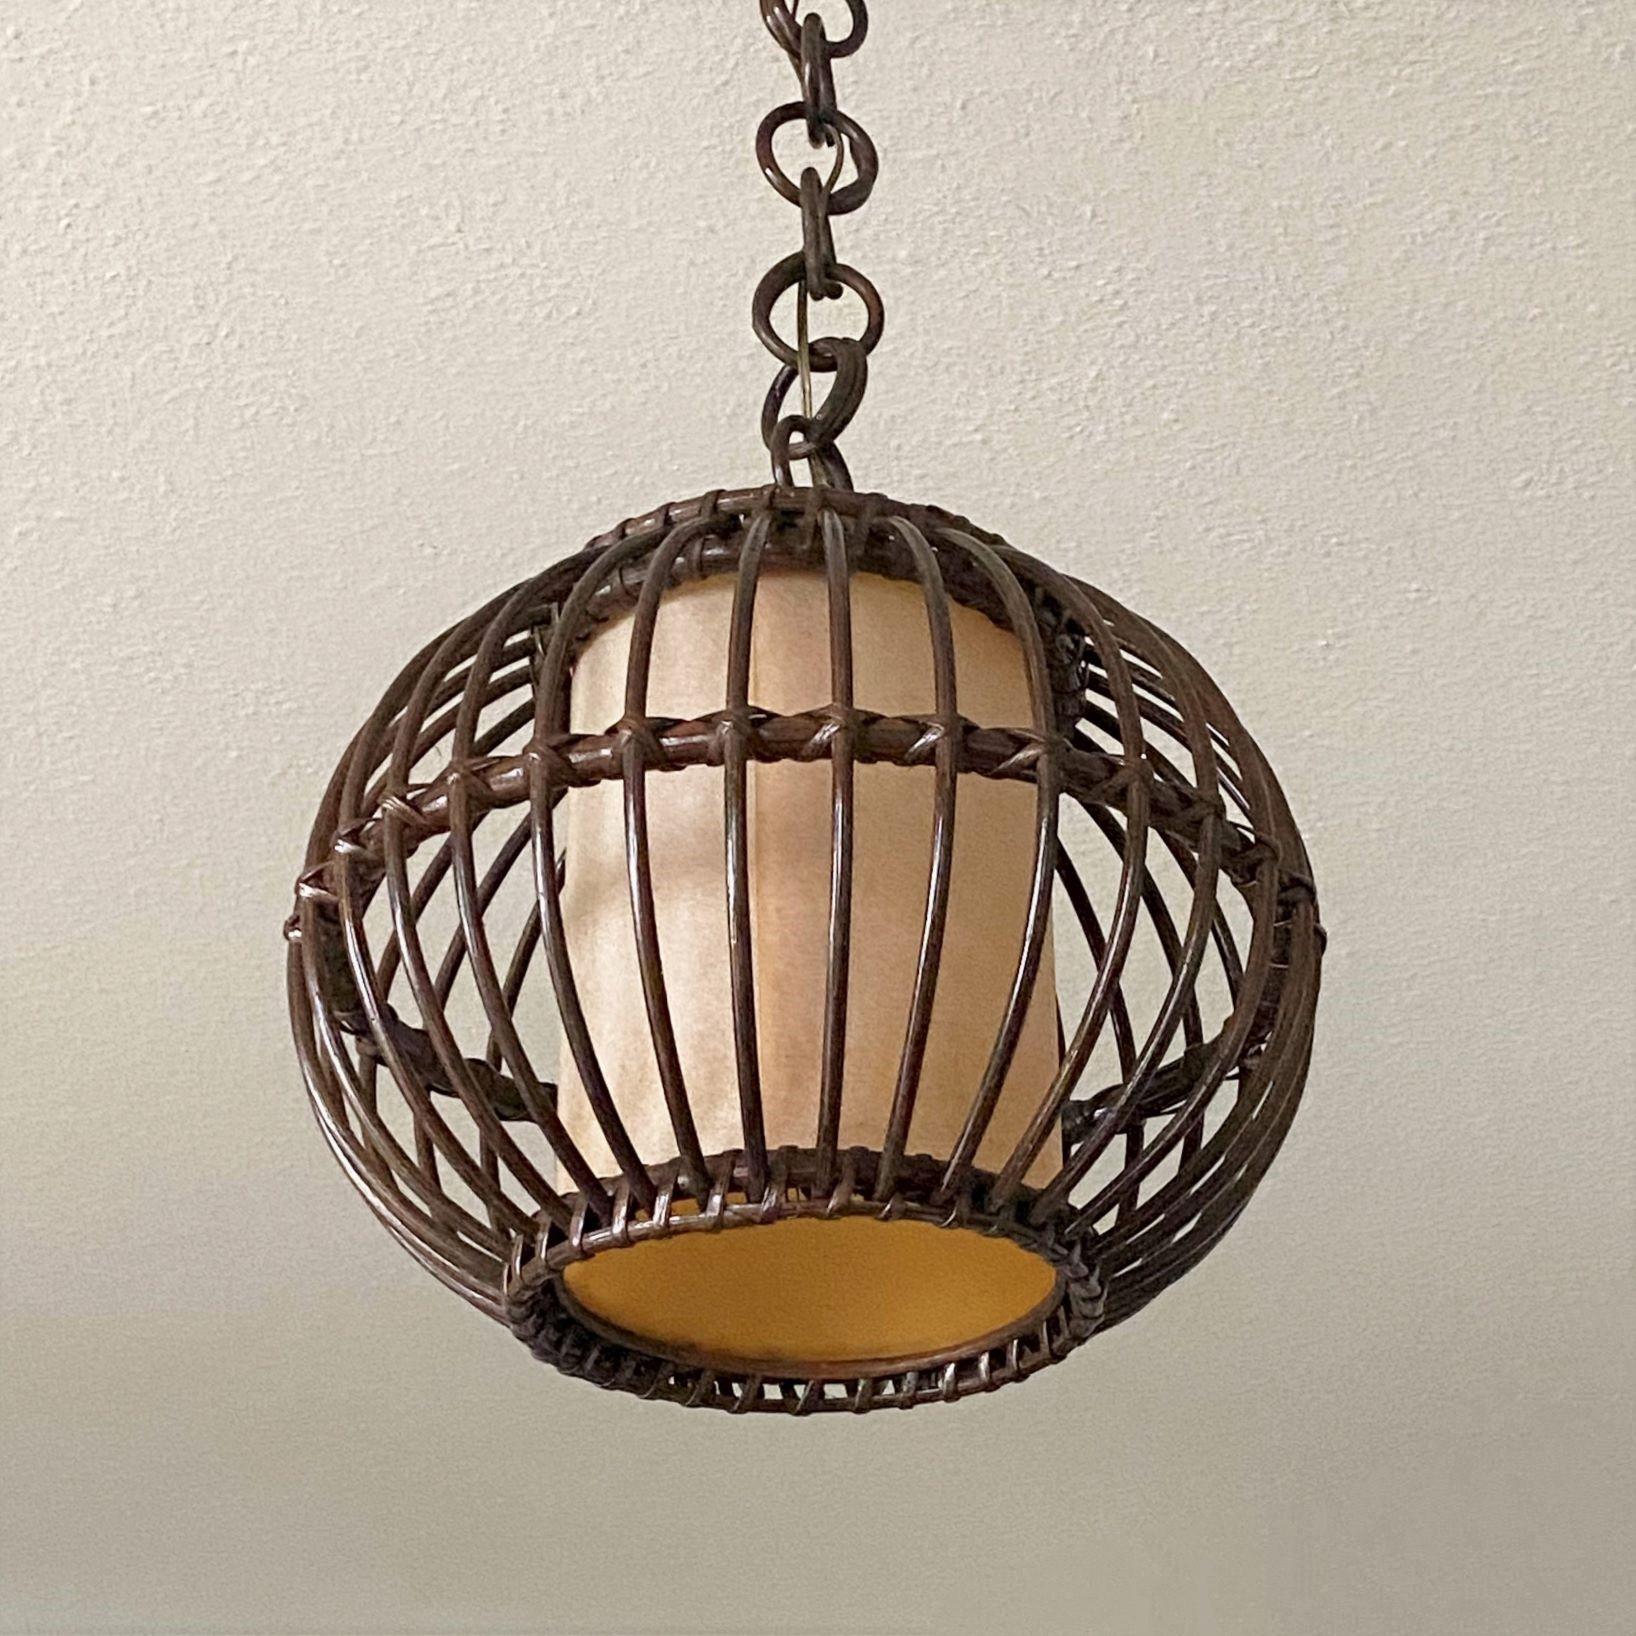 French Louis Sognot Bamboo Rattan Pendant Lantern with Perchment Shade, France, 1950s For Sale